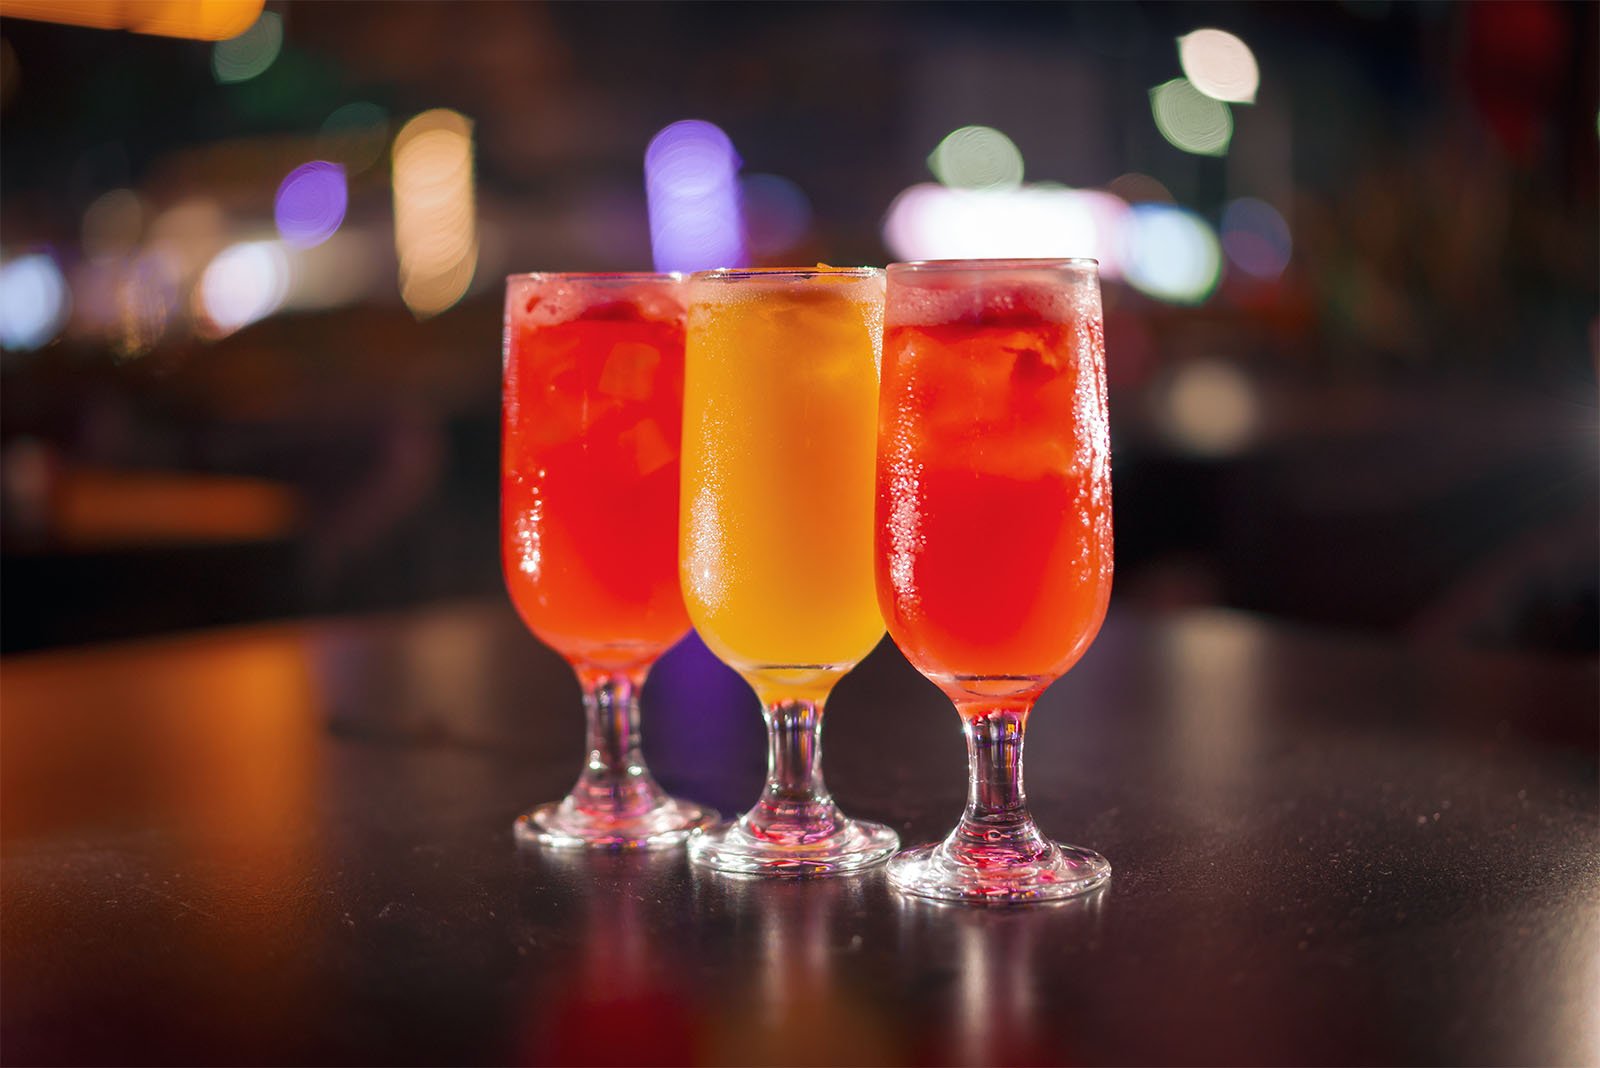 Three colorful cocktails in stemmed glasses on a bar counter, illuminated by soft background lighting with blurred lights.